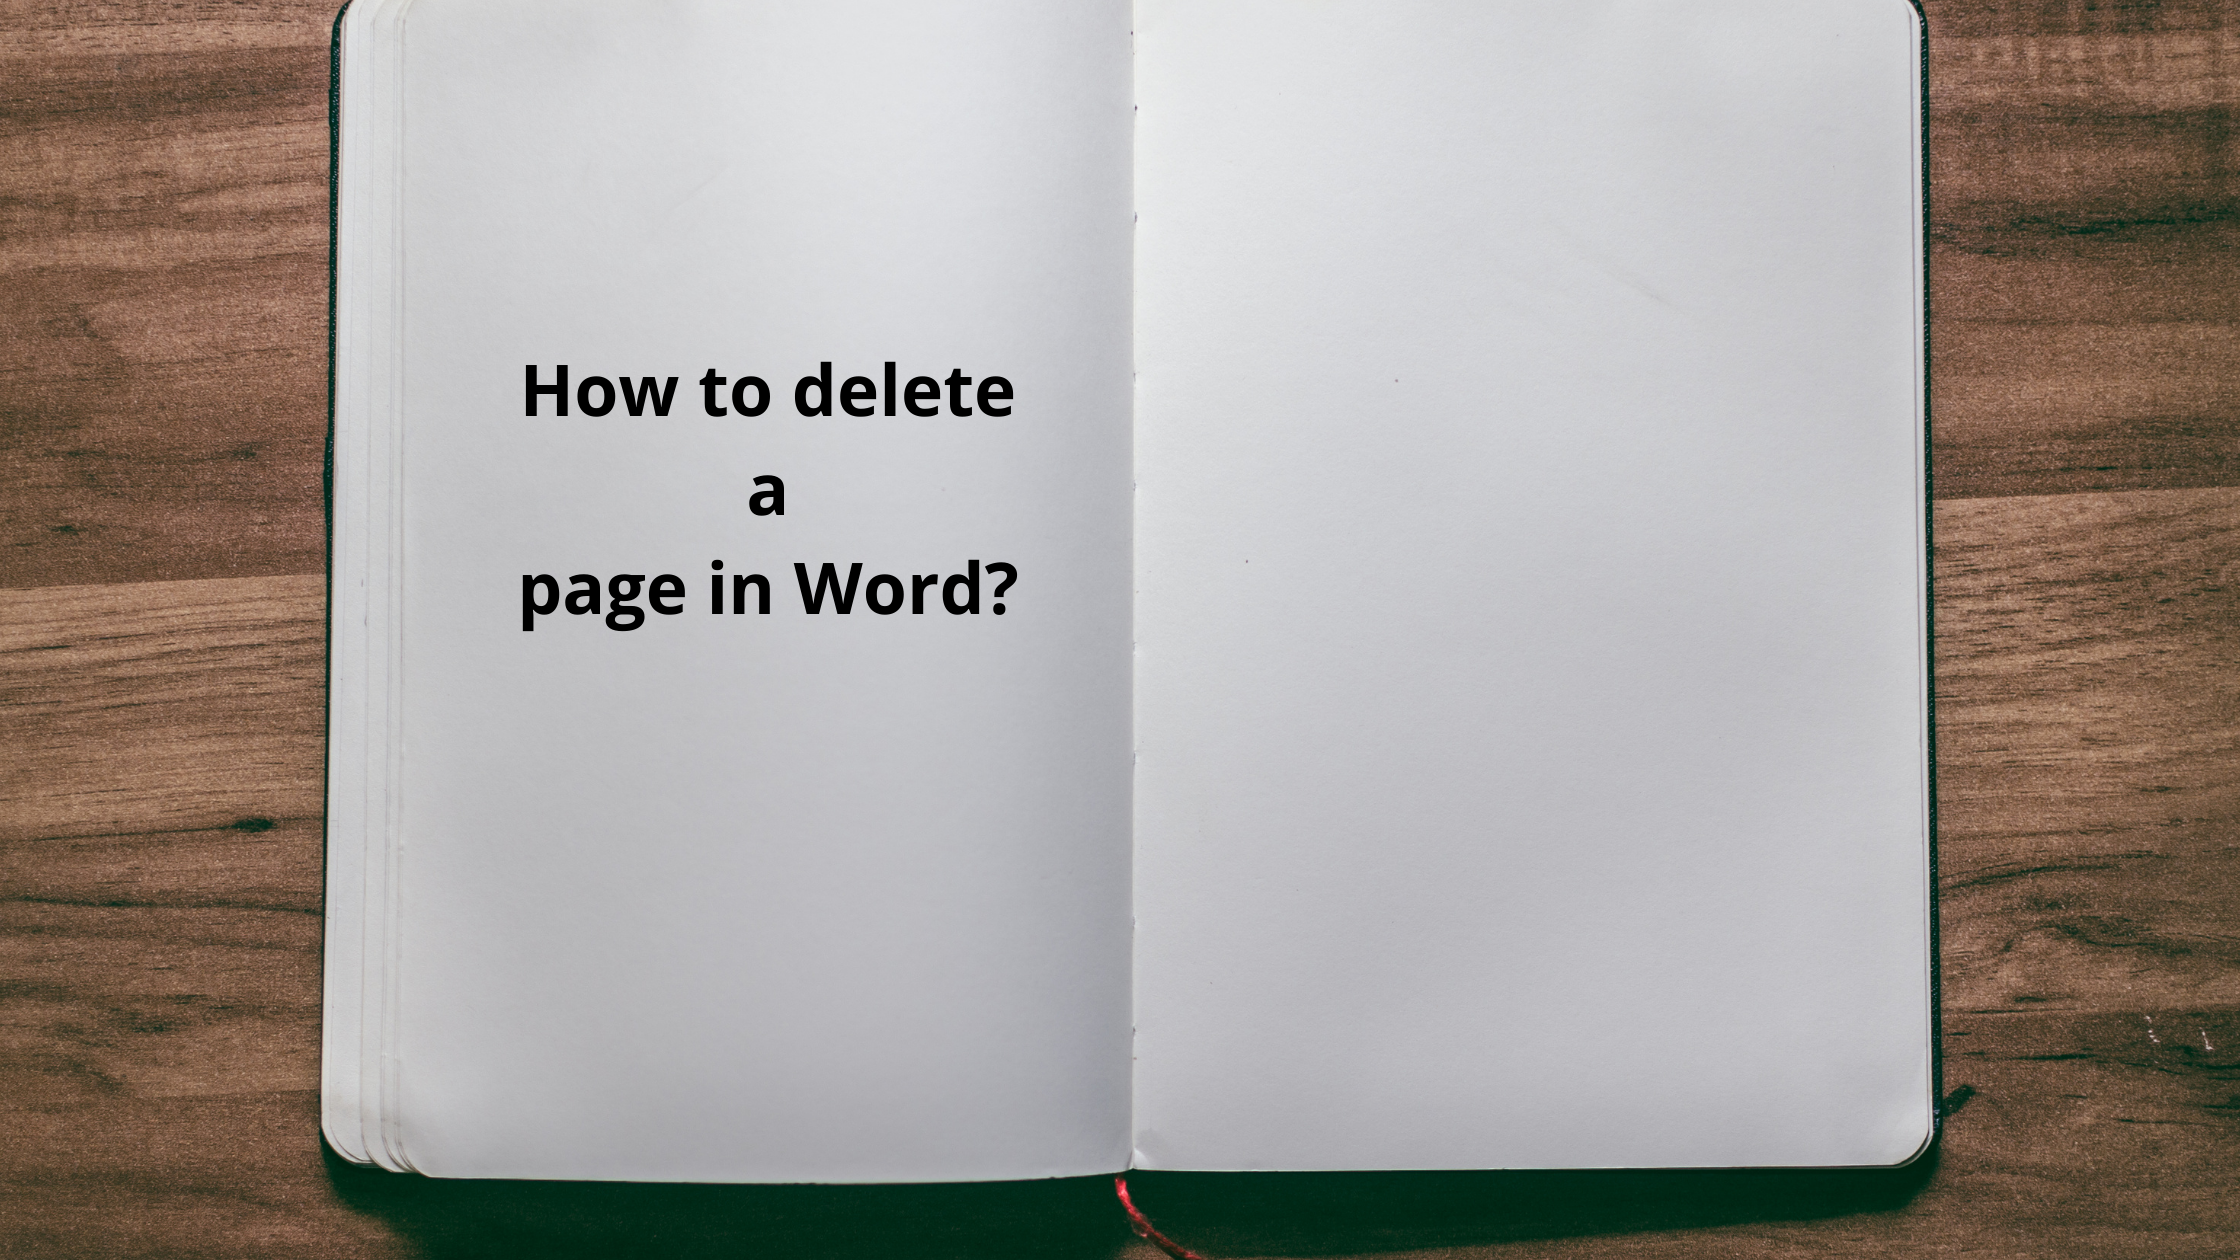 How to delete a page in Word?